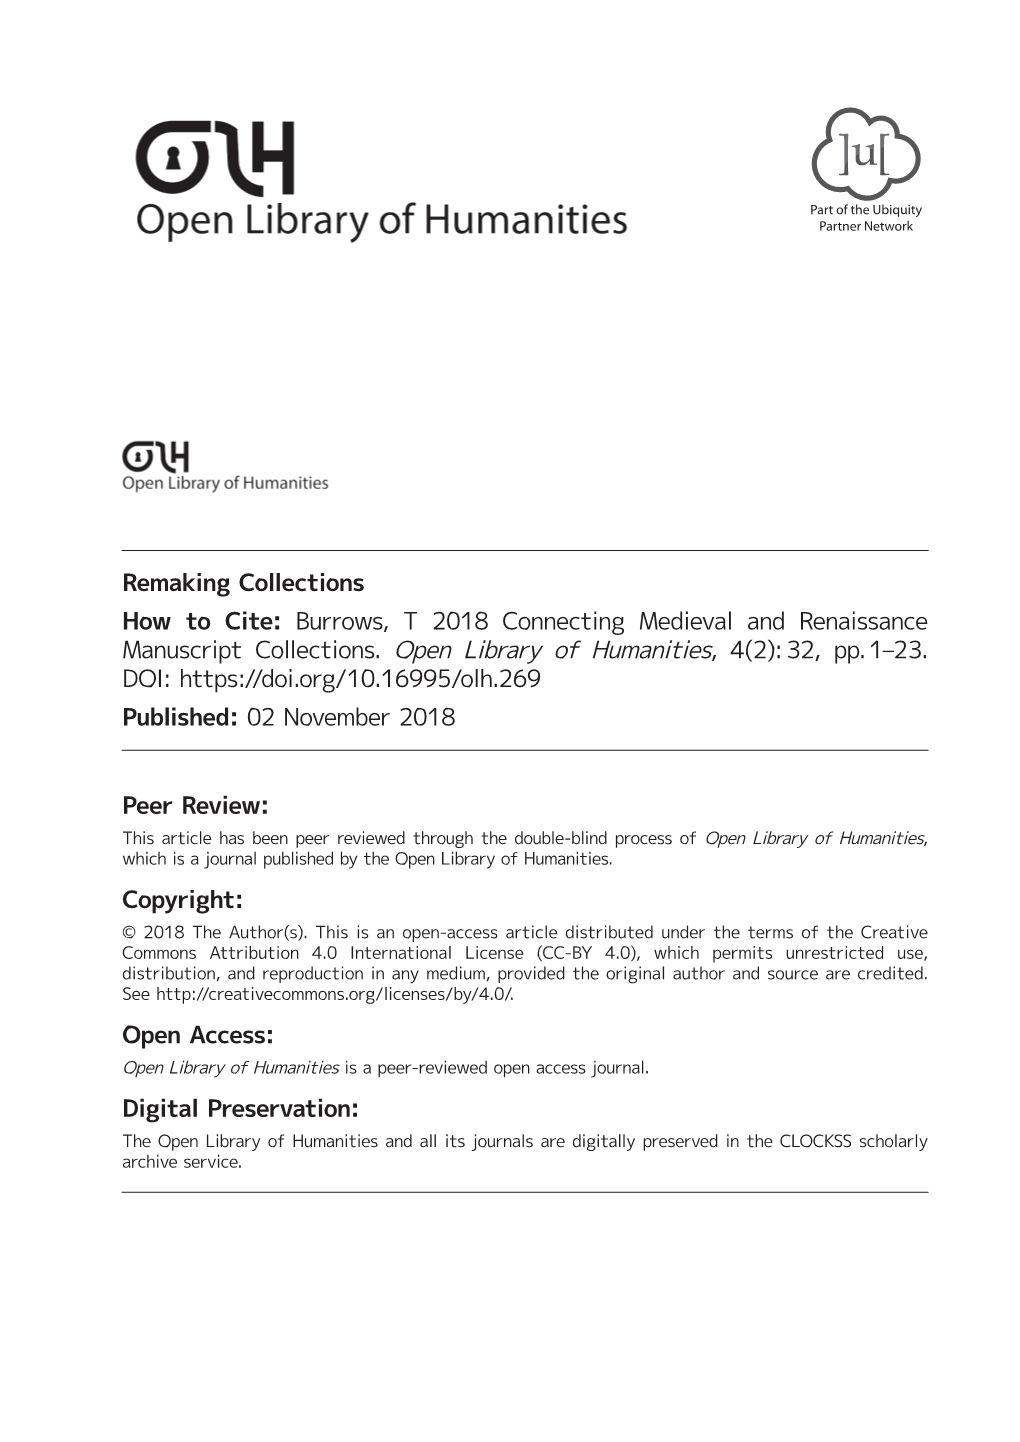 Connecting Medieval and Renaissance Manuscript Collections’ (2018) 4(2): 32 Open Library of Humanities